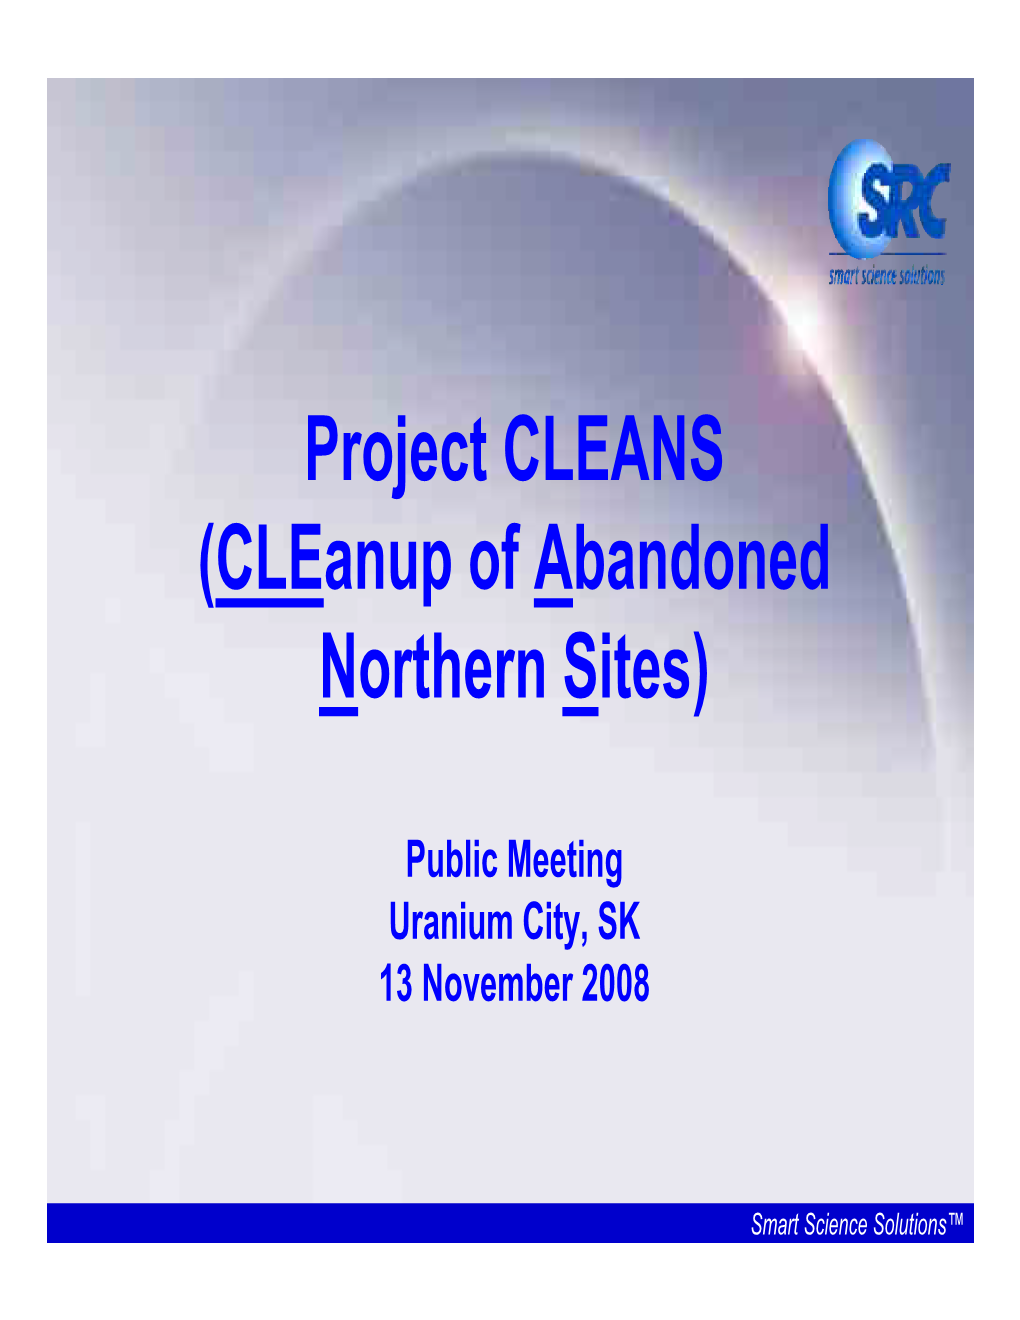 Project CLEANS (Cleanup of Abandoned Northern Sites)